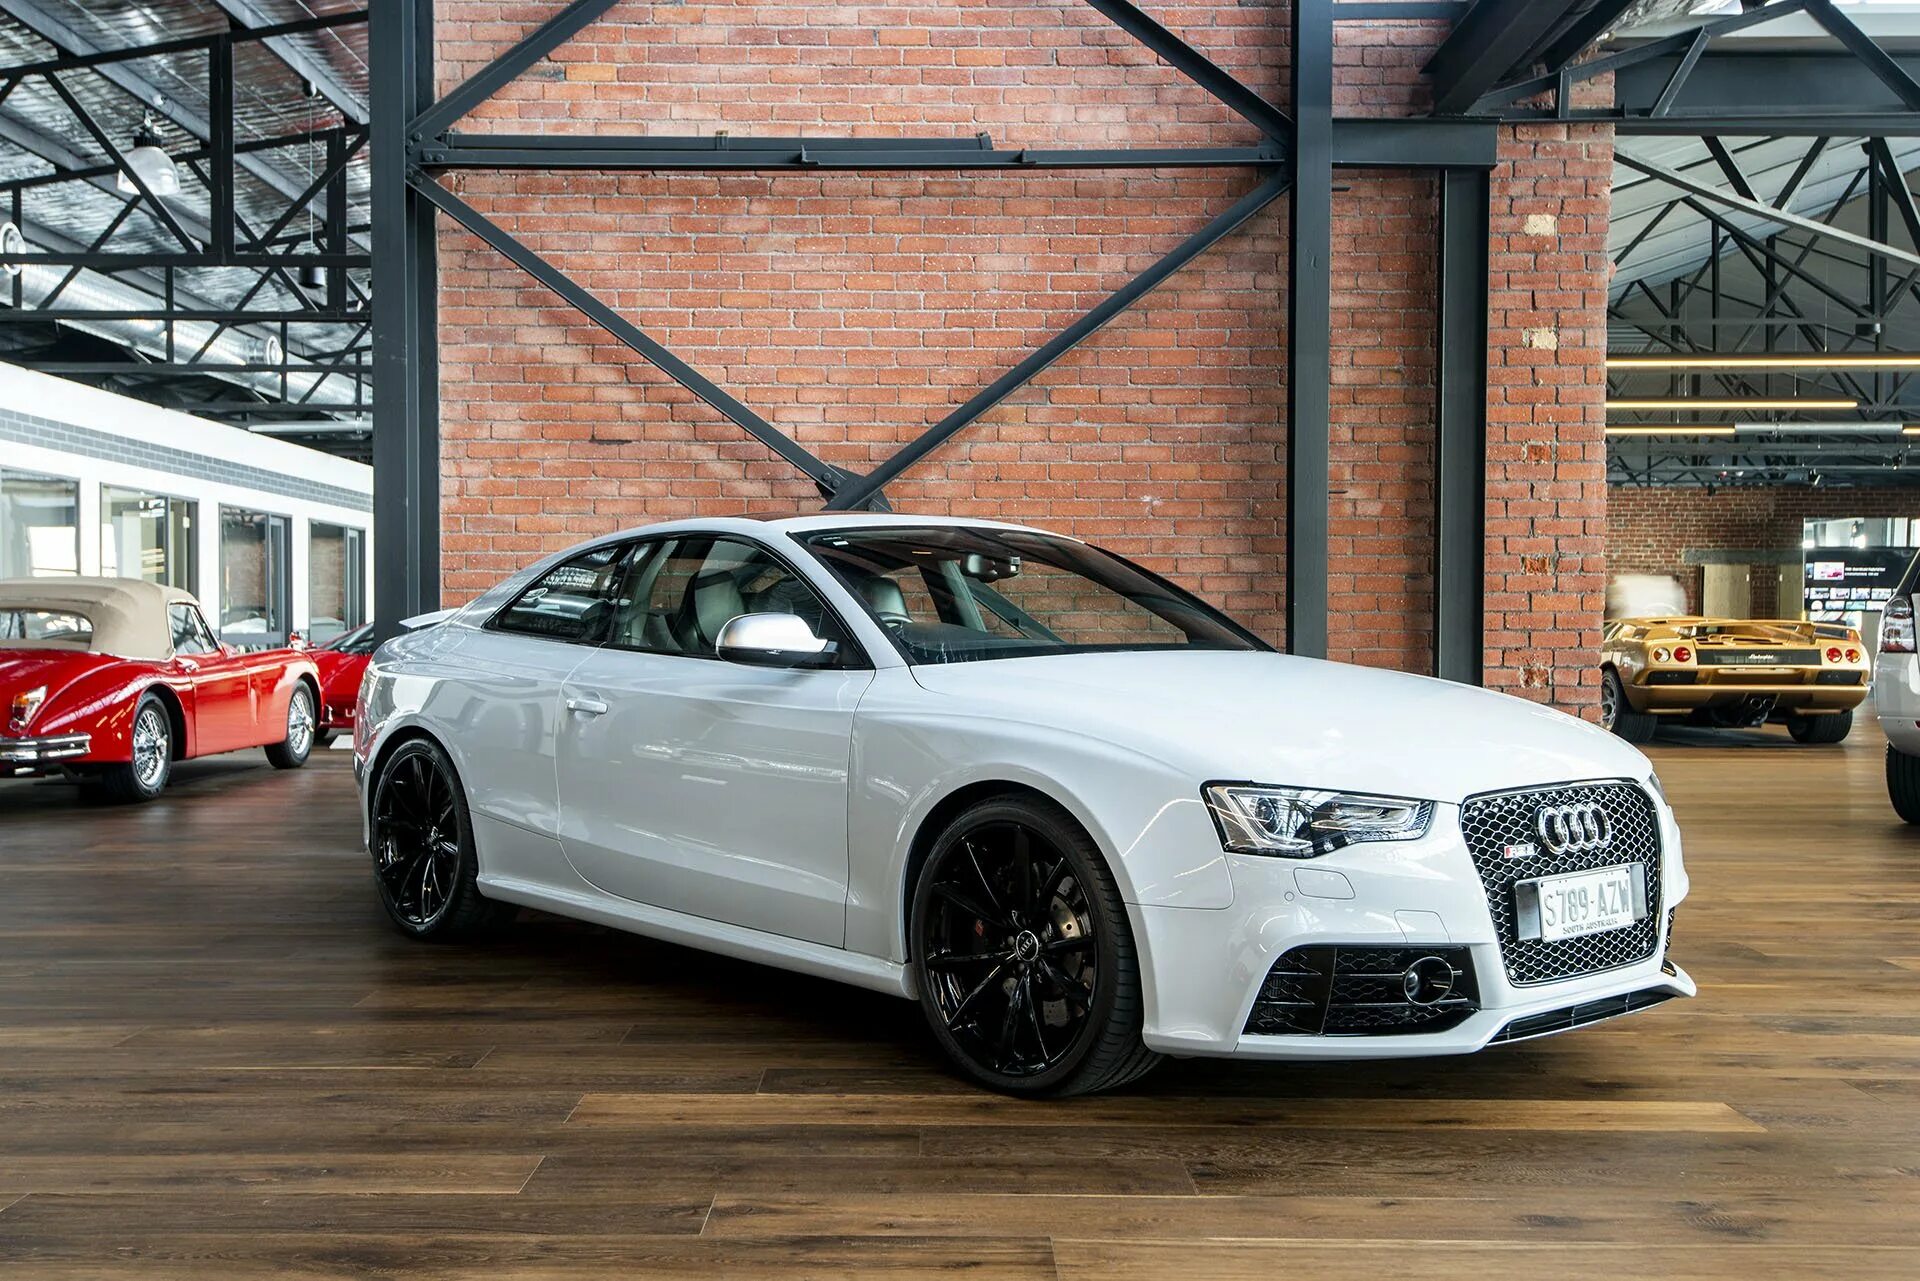 Audi rs5 8t. Ауди а5 rs5. Ауди rs5 купе. Audi rs5 Coupe White.